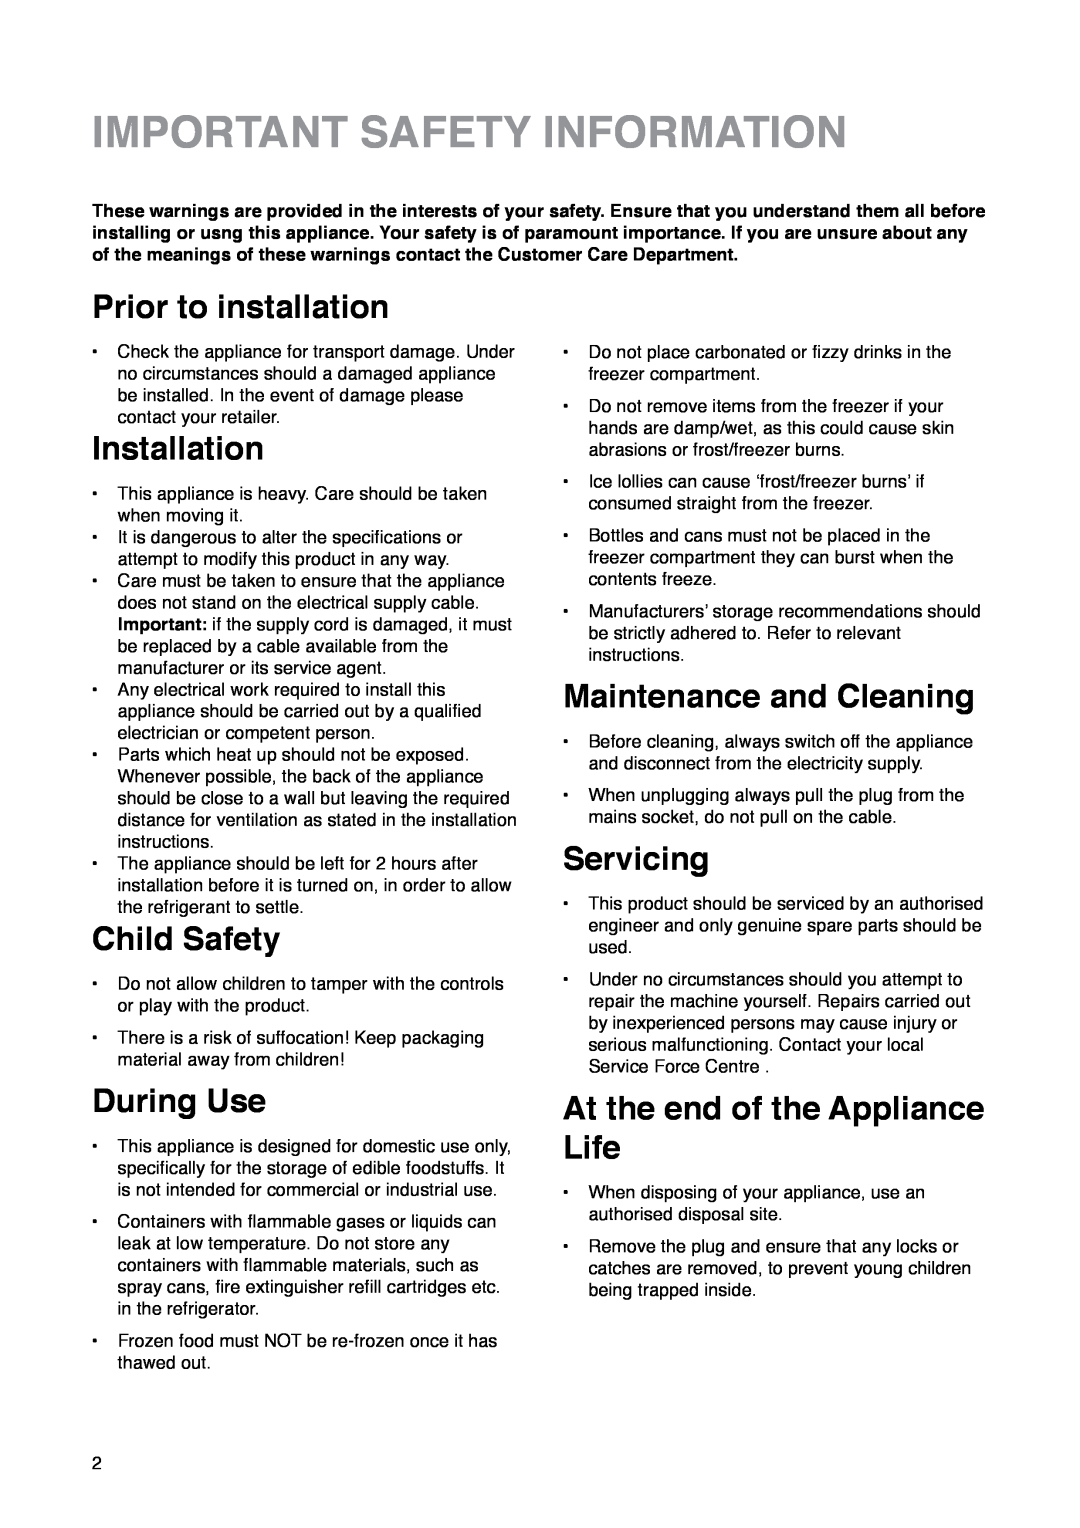 Zanussi ZK 60/30 RM Important Safety Information, Prior to installation, Installation, Child Safety, Servicing, During Use 